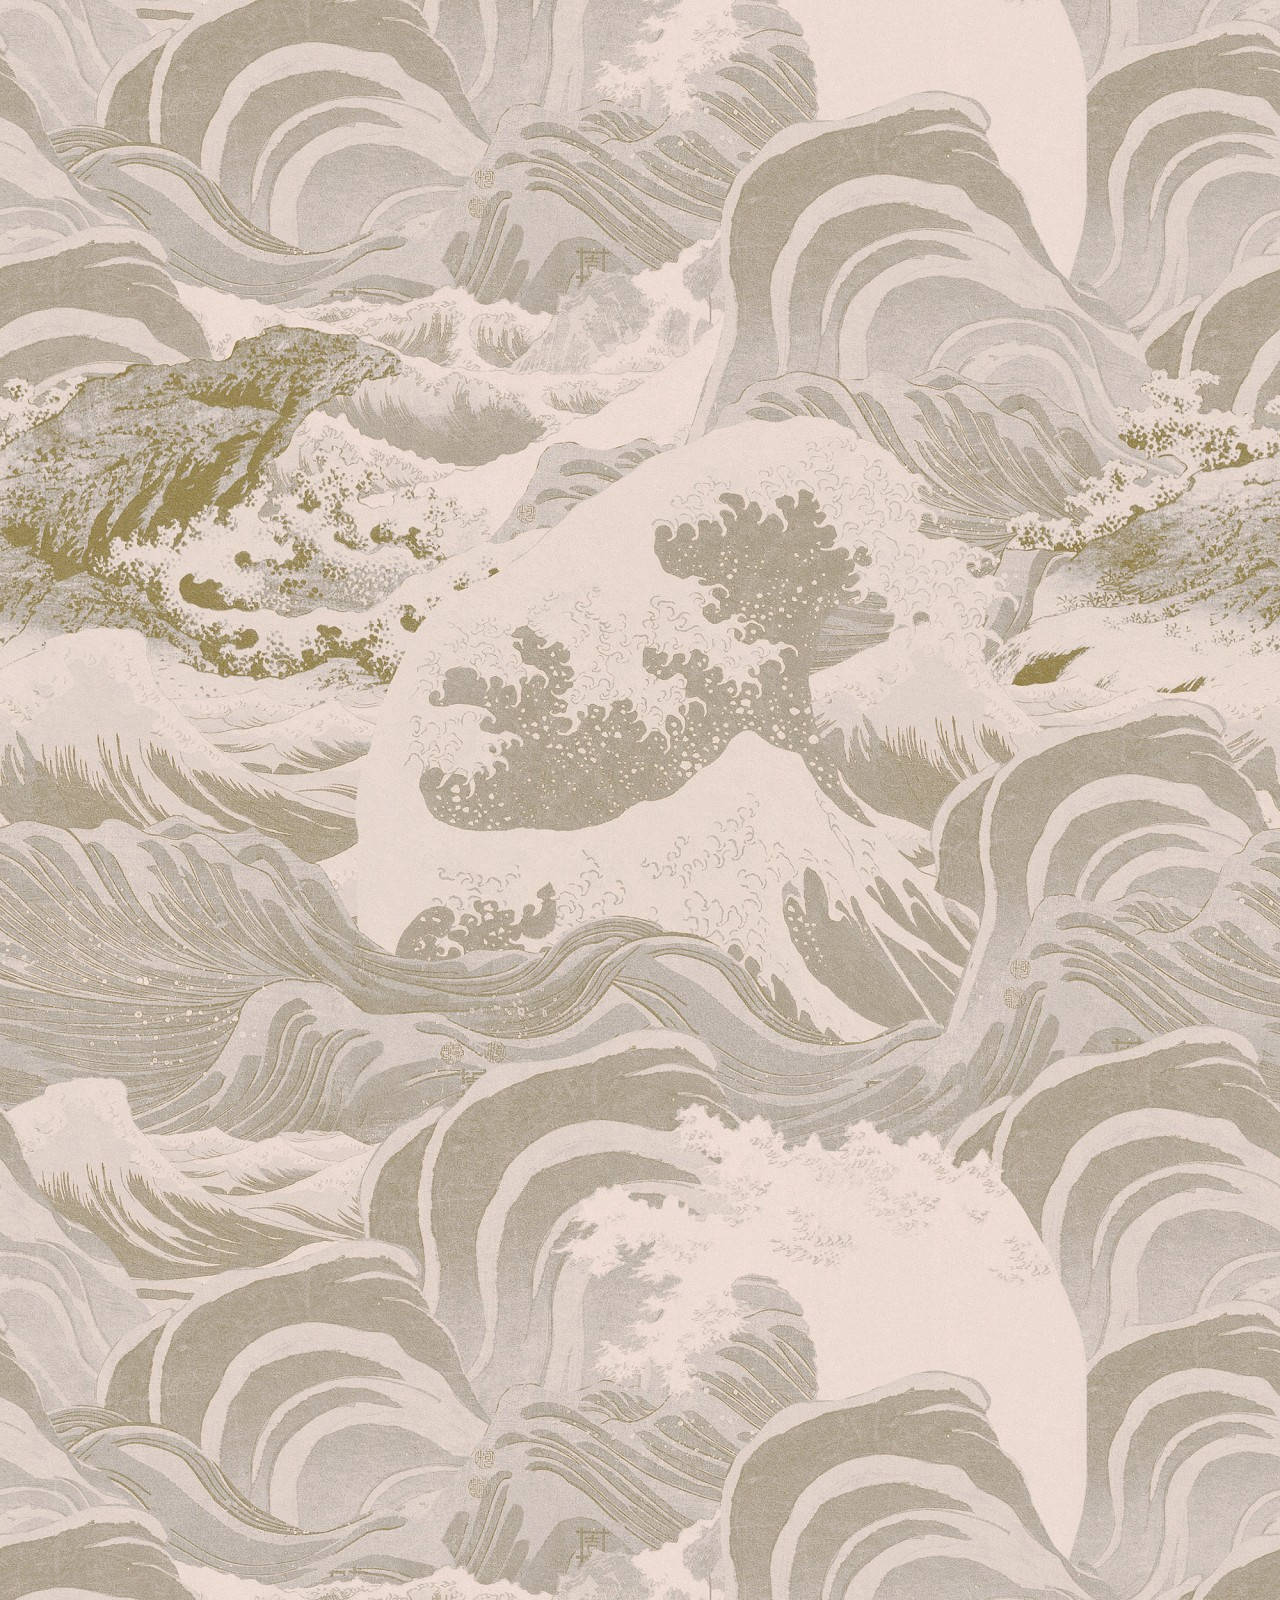 Neutral Aesthetic iPhone Wallpaper Featuring Ocean Wave and Mountain Art. Wallpaper